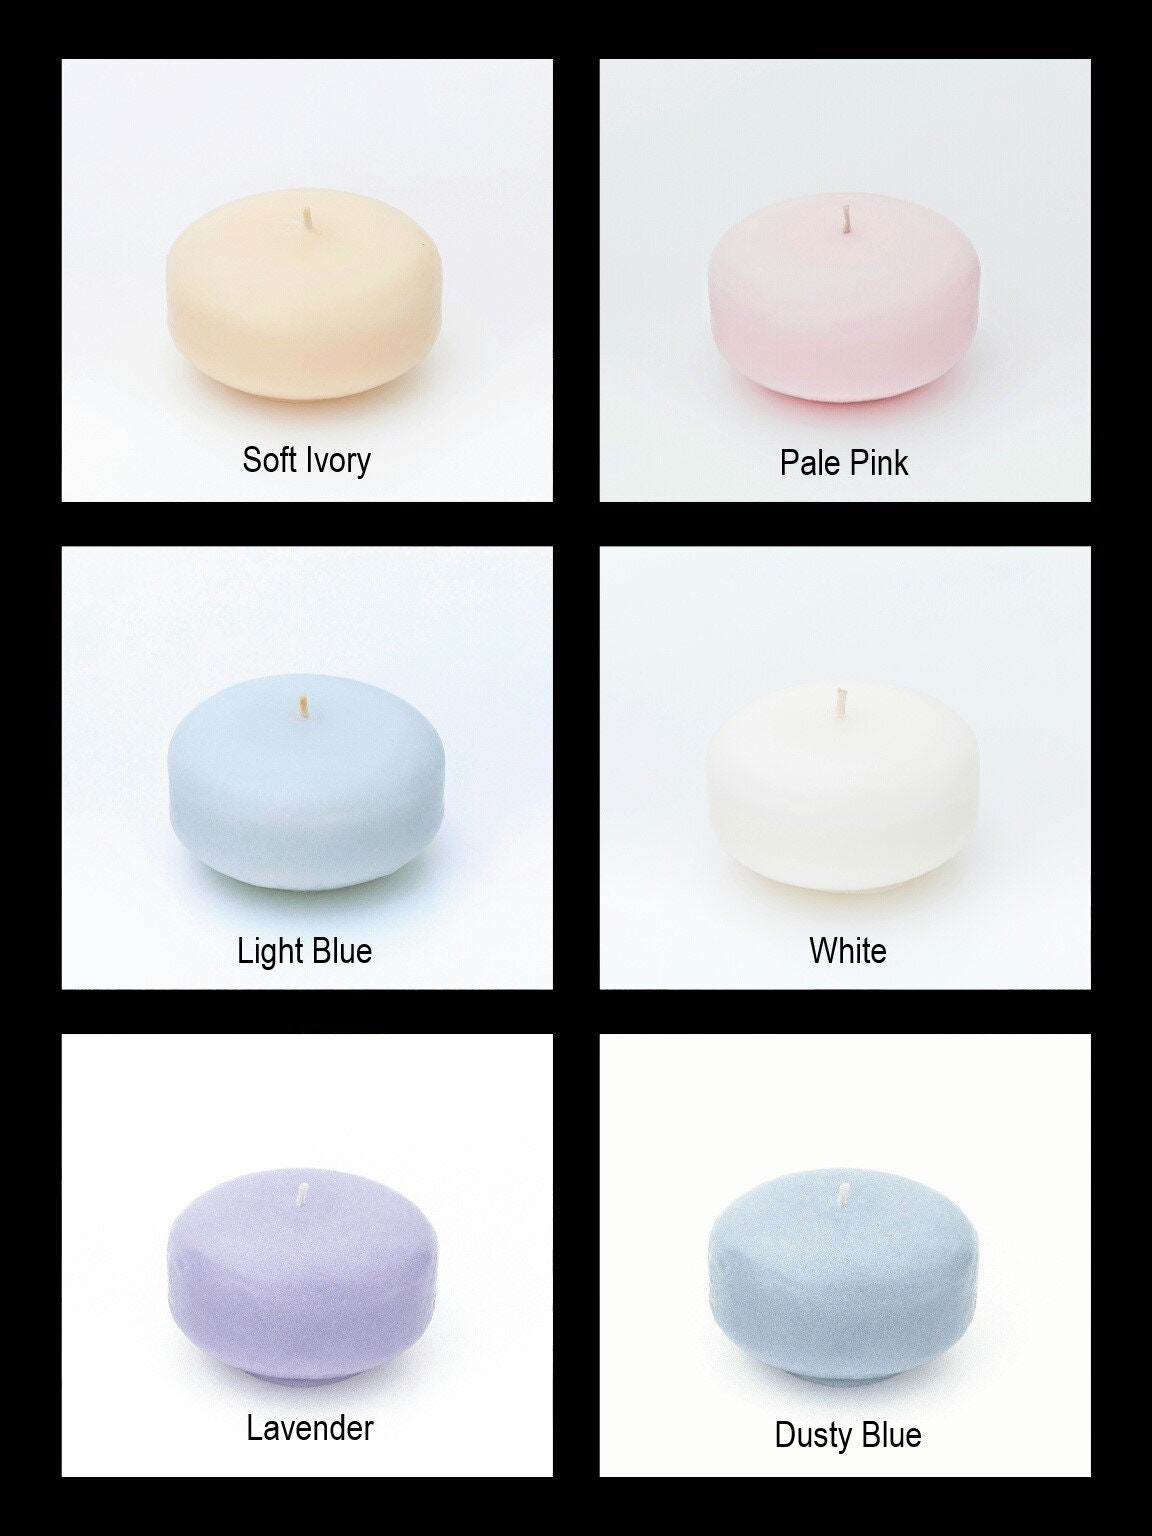 21 Different Types of Candles and How to Choose One